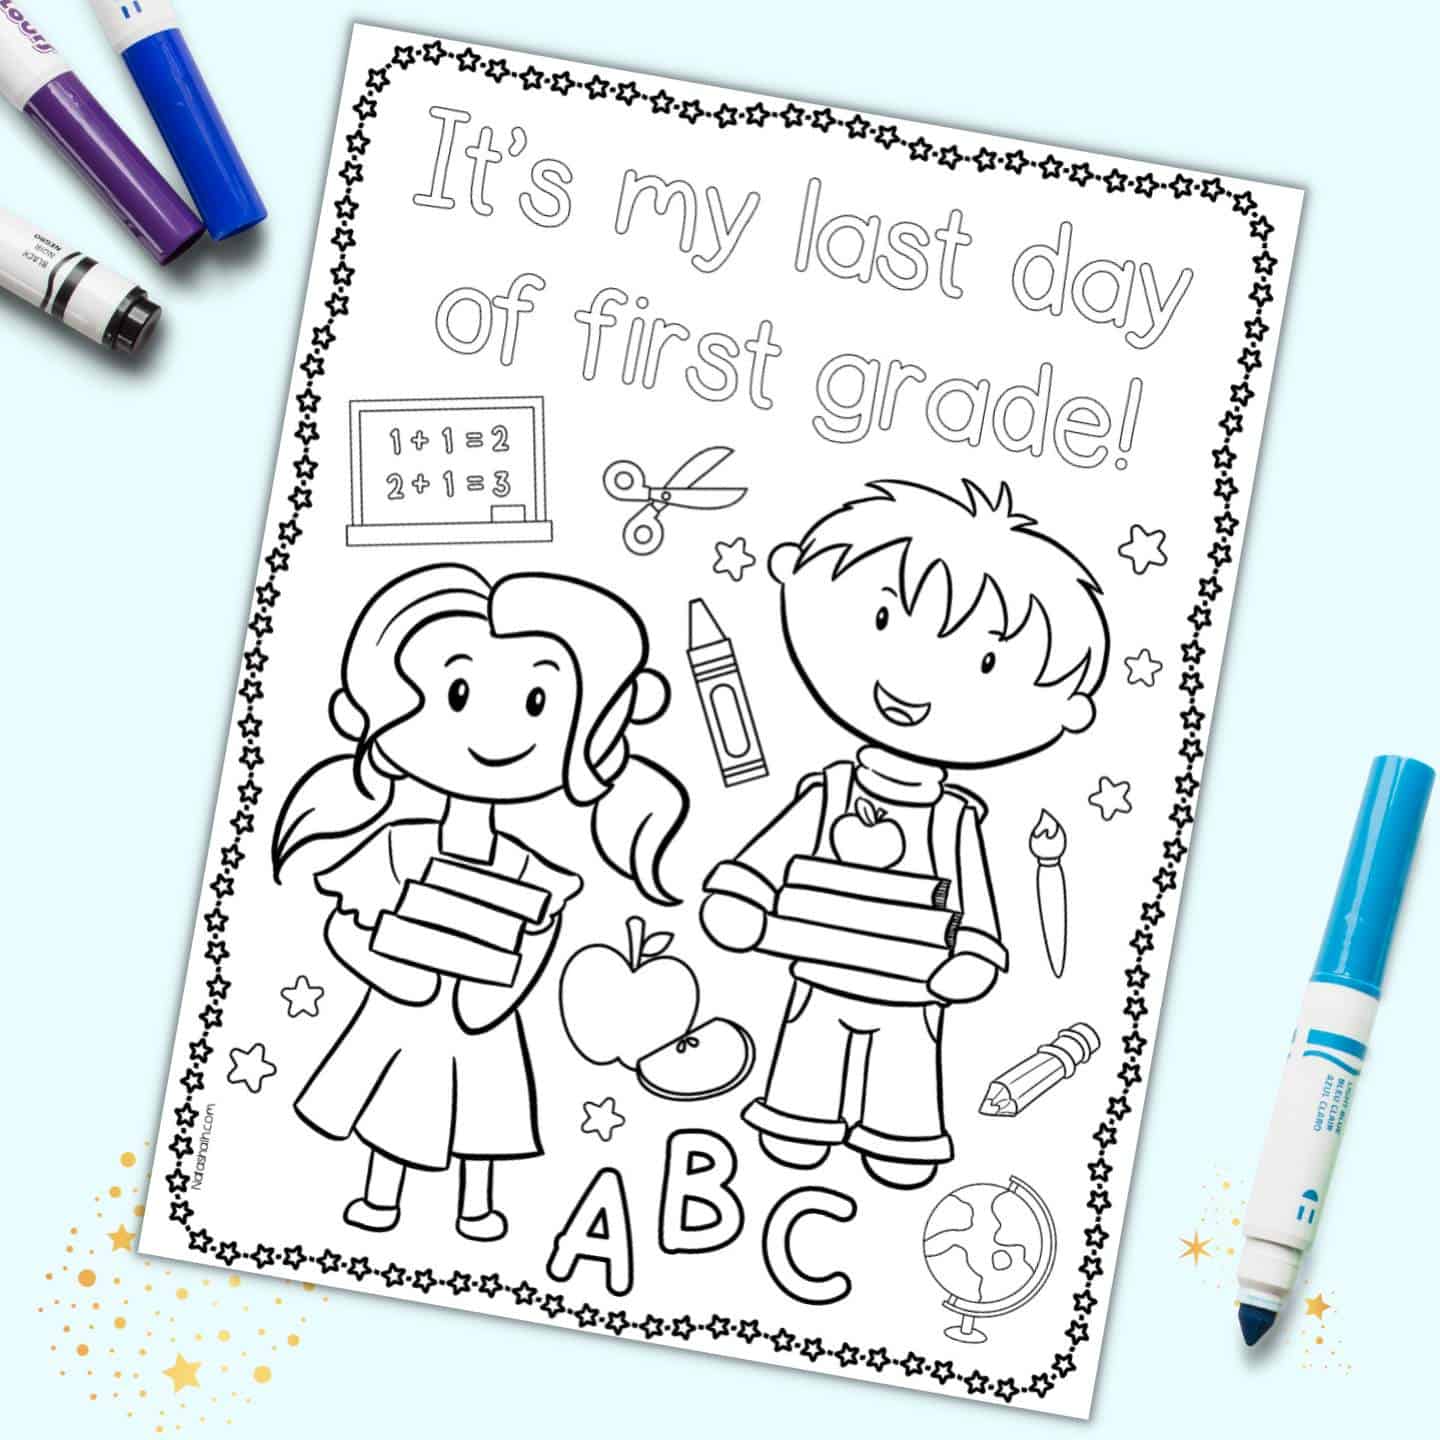 free-printable-last-day-of-first-grade-coloring-page-the-artisan-life